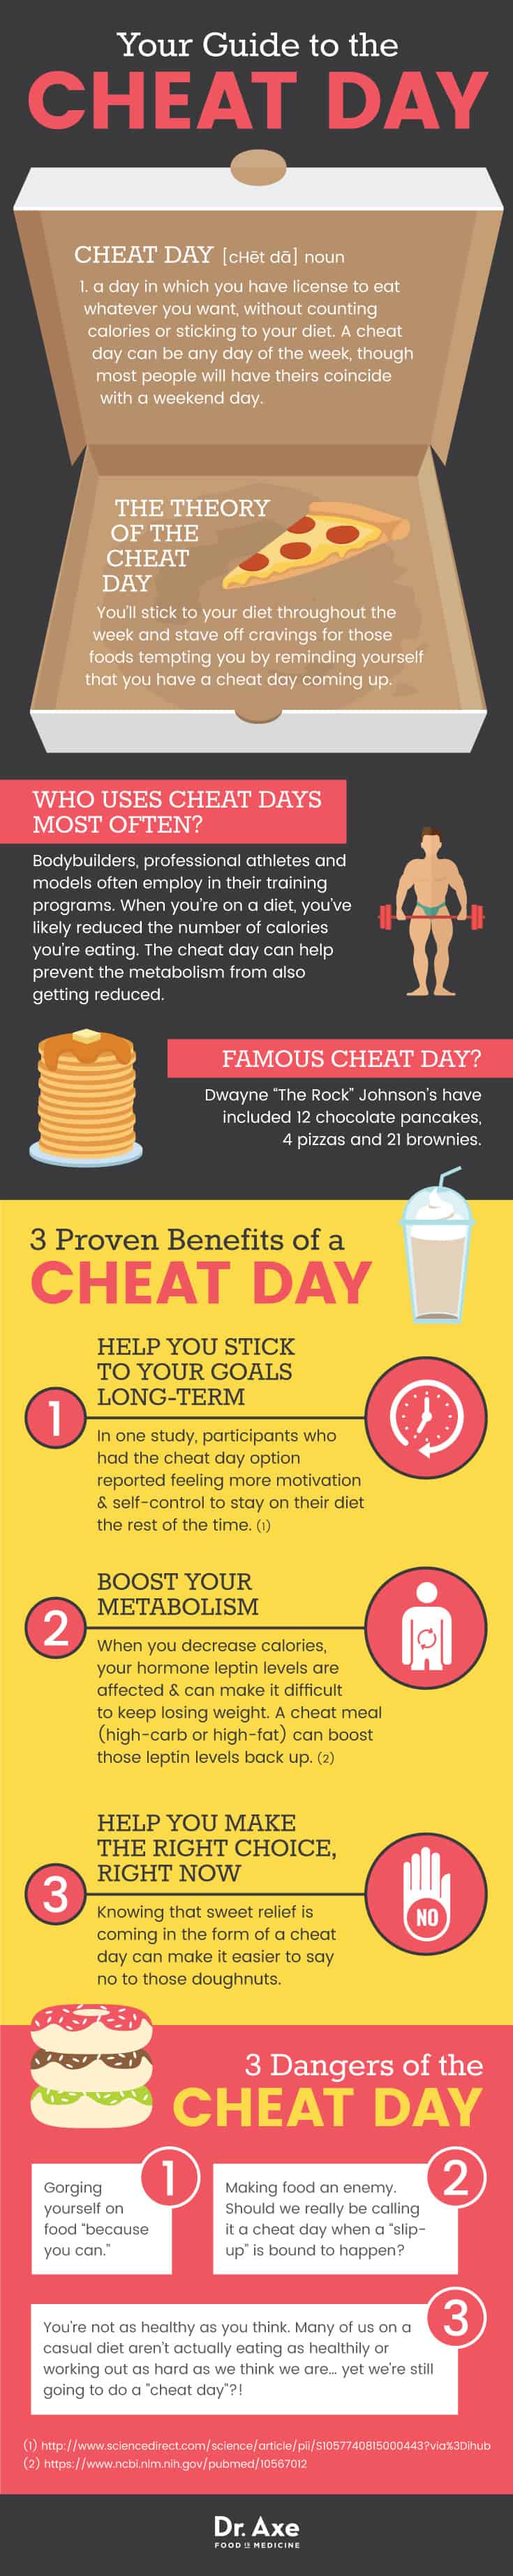 Your guide to the cheat day - Dr. Axe